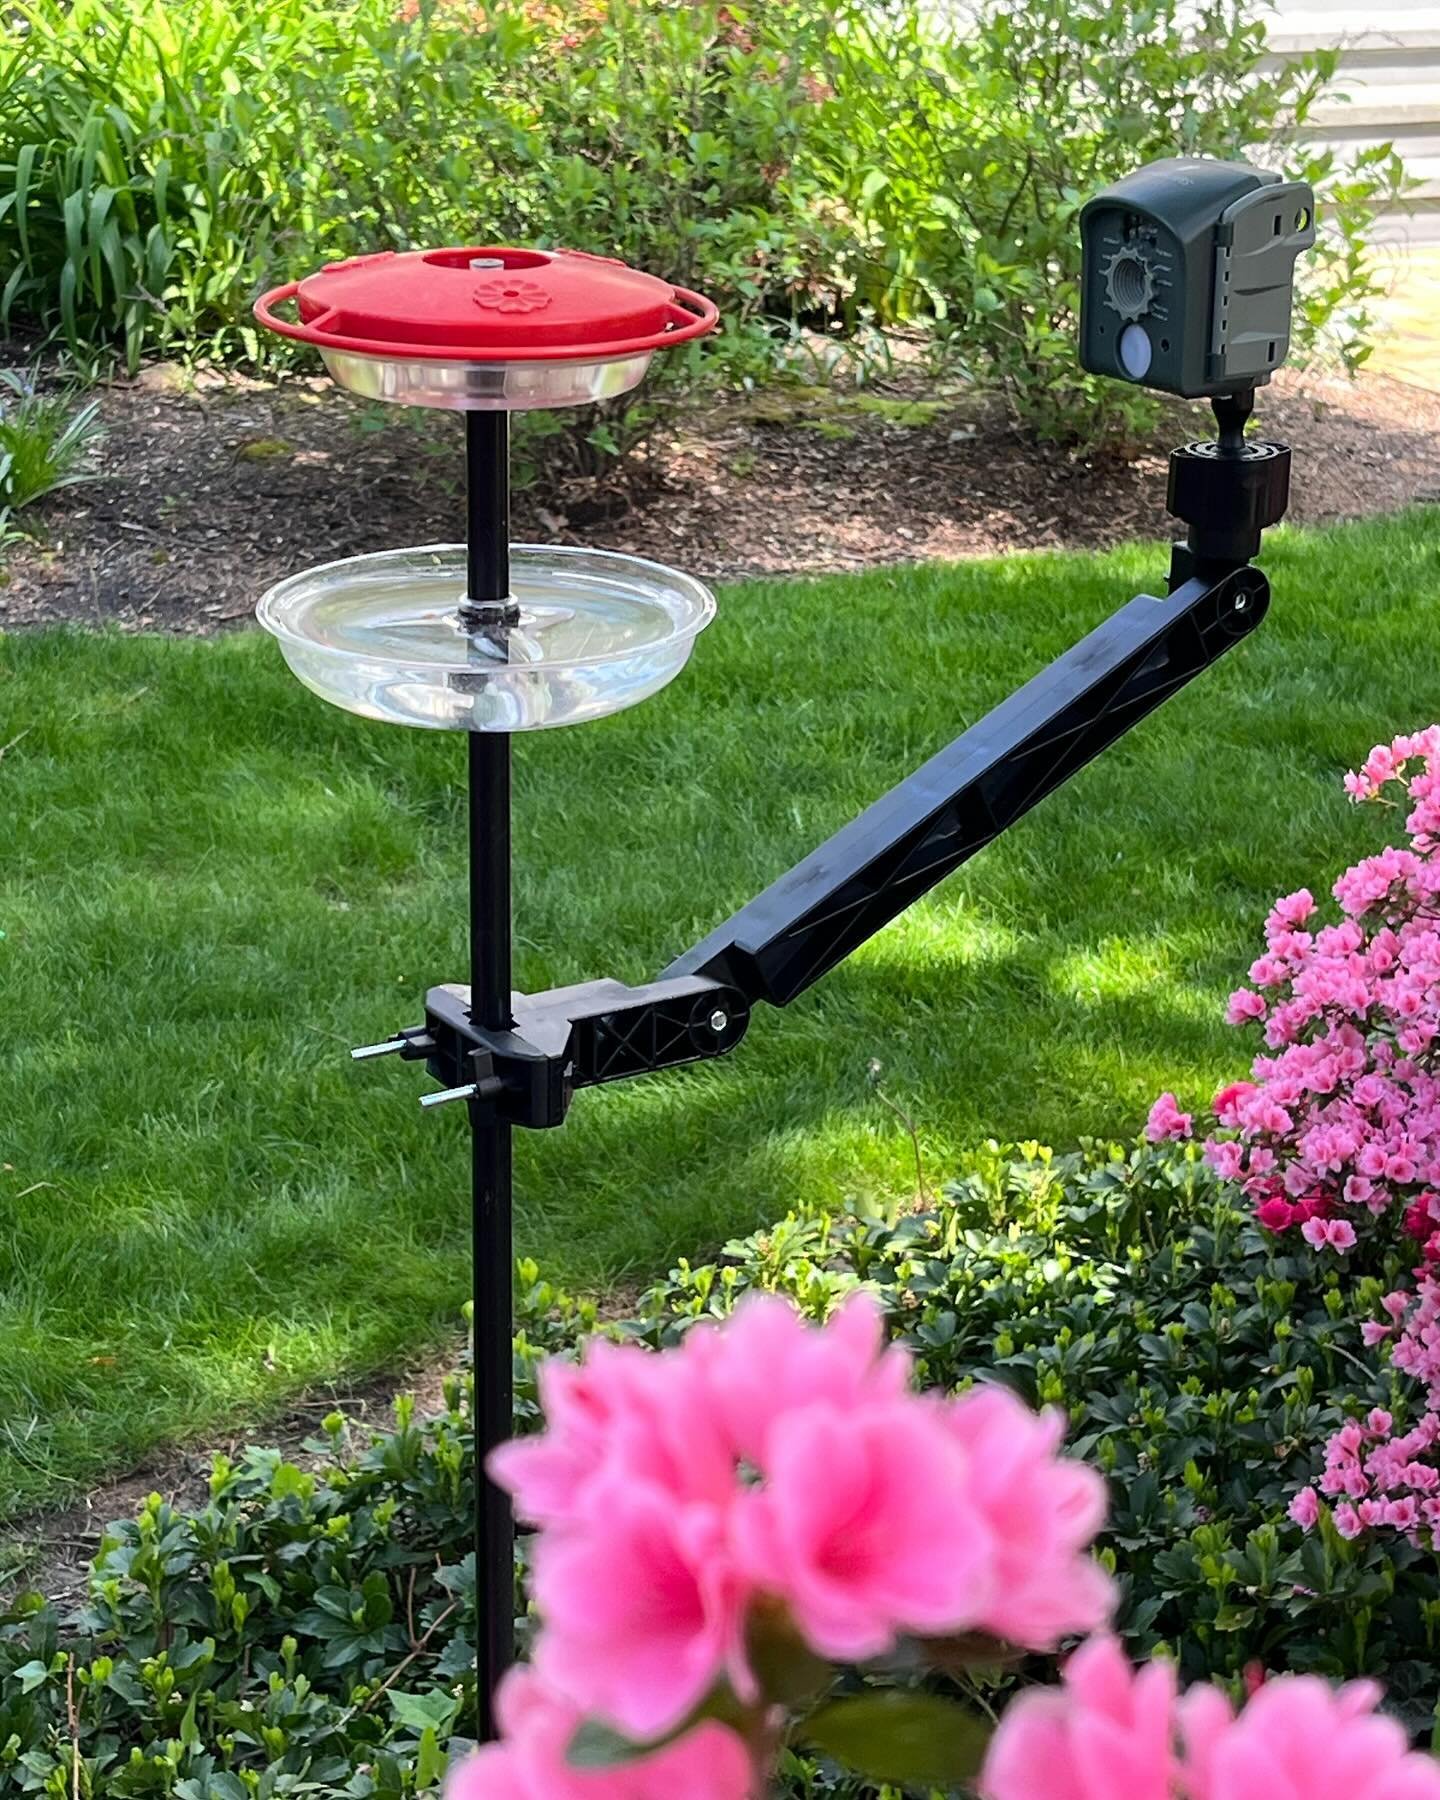 Our garden is blooming and the #hummingbirds are on their way, so it&rsquo;s time to set up our @wingscapes camera for the first time. Pole-mounting our nectar feeder makes for a perfectly stable platform, though in this image @theantmote is a bit hi